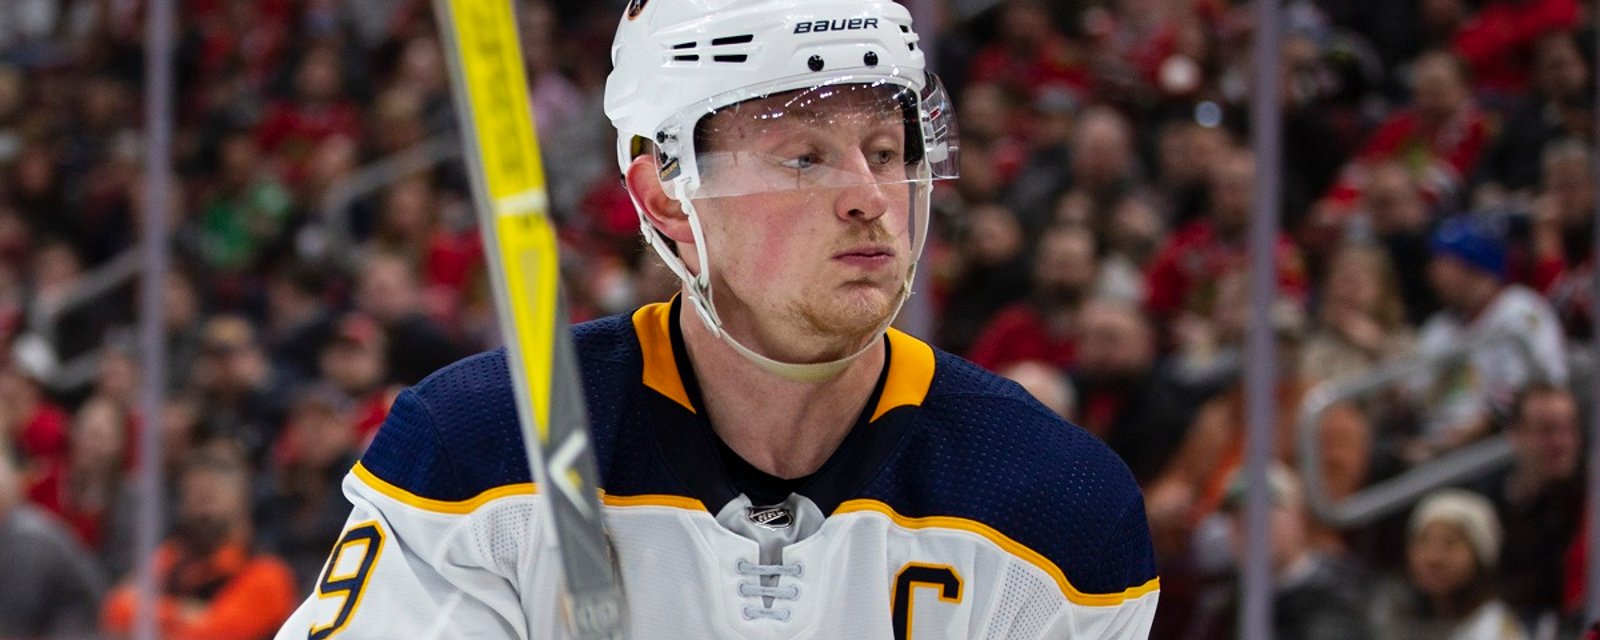 Breaking: Jack Eichel has been suspended by the NHL!